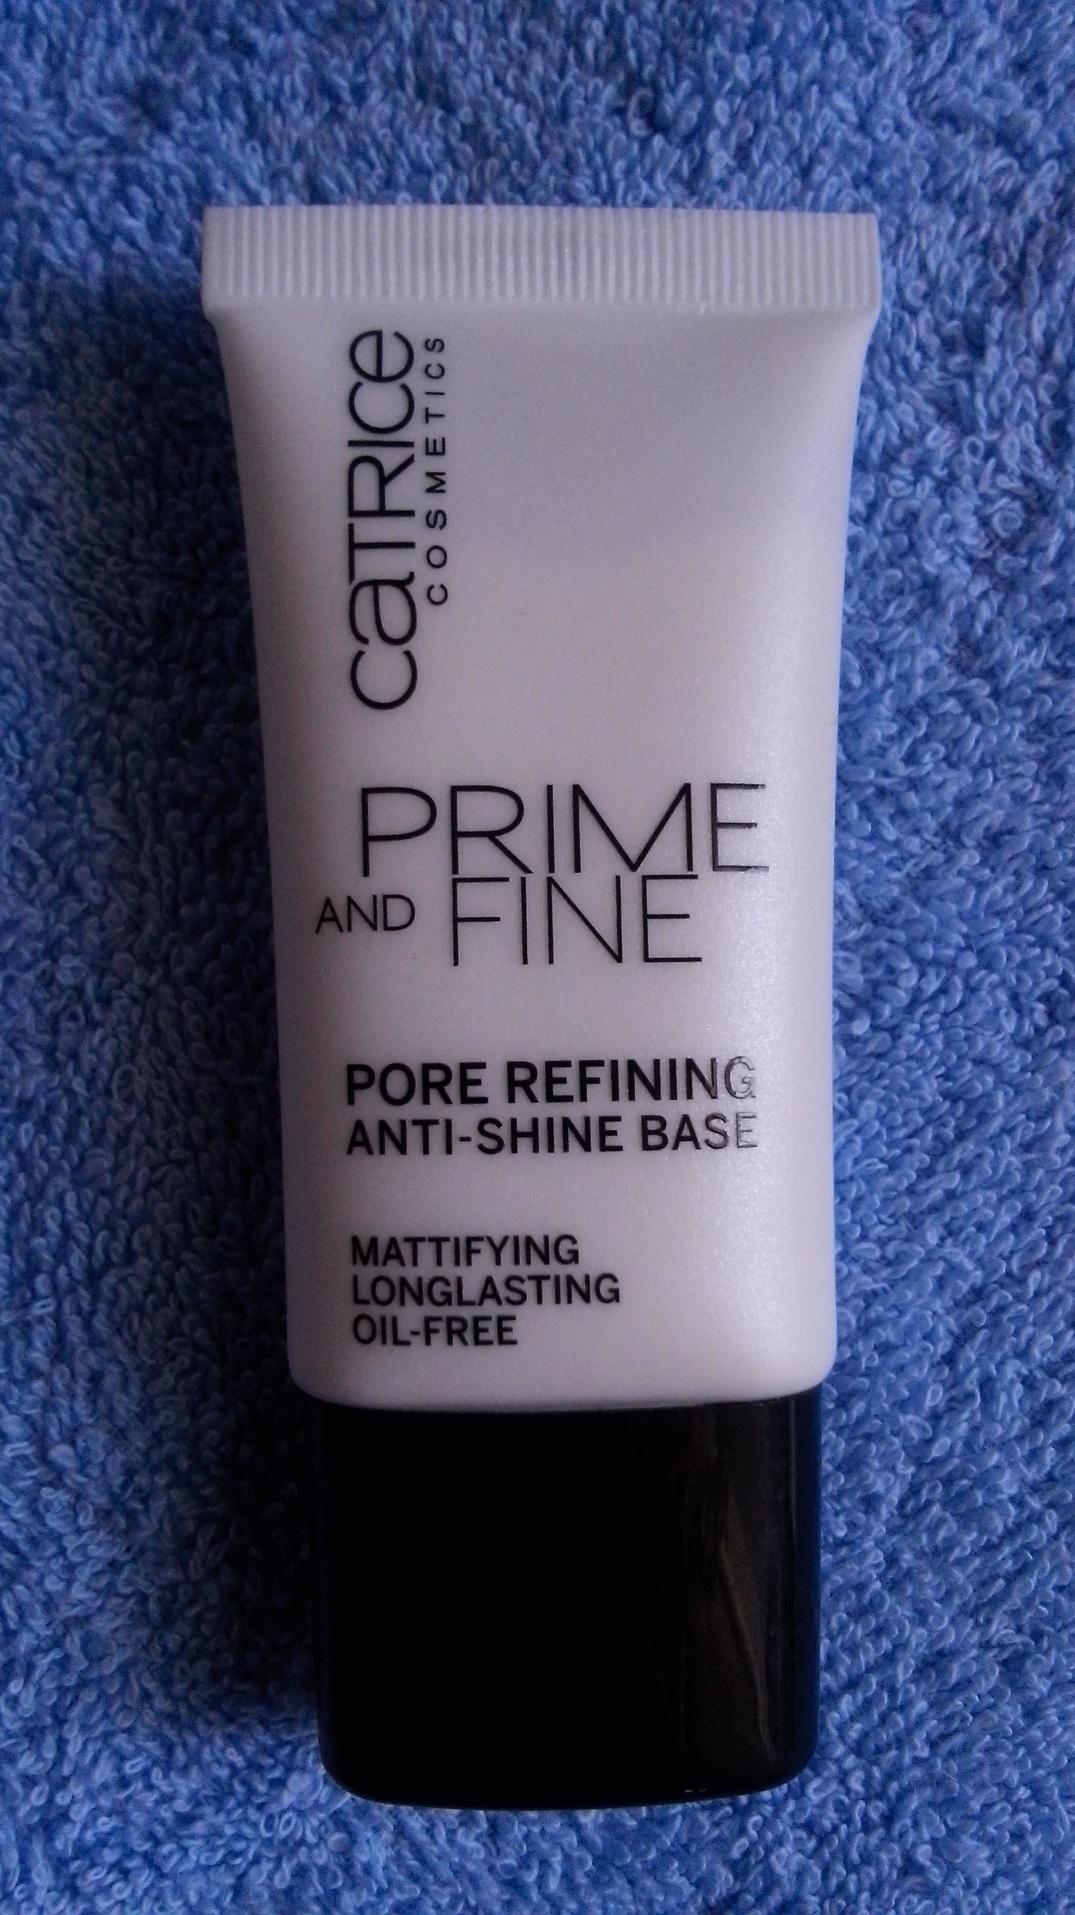 BEAUTY REVIEW: Catrice Primer and Palladio Eyebrow Gel